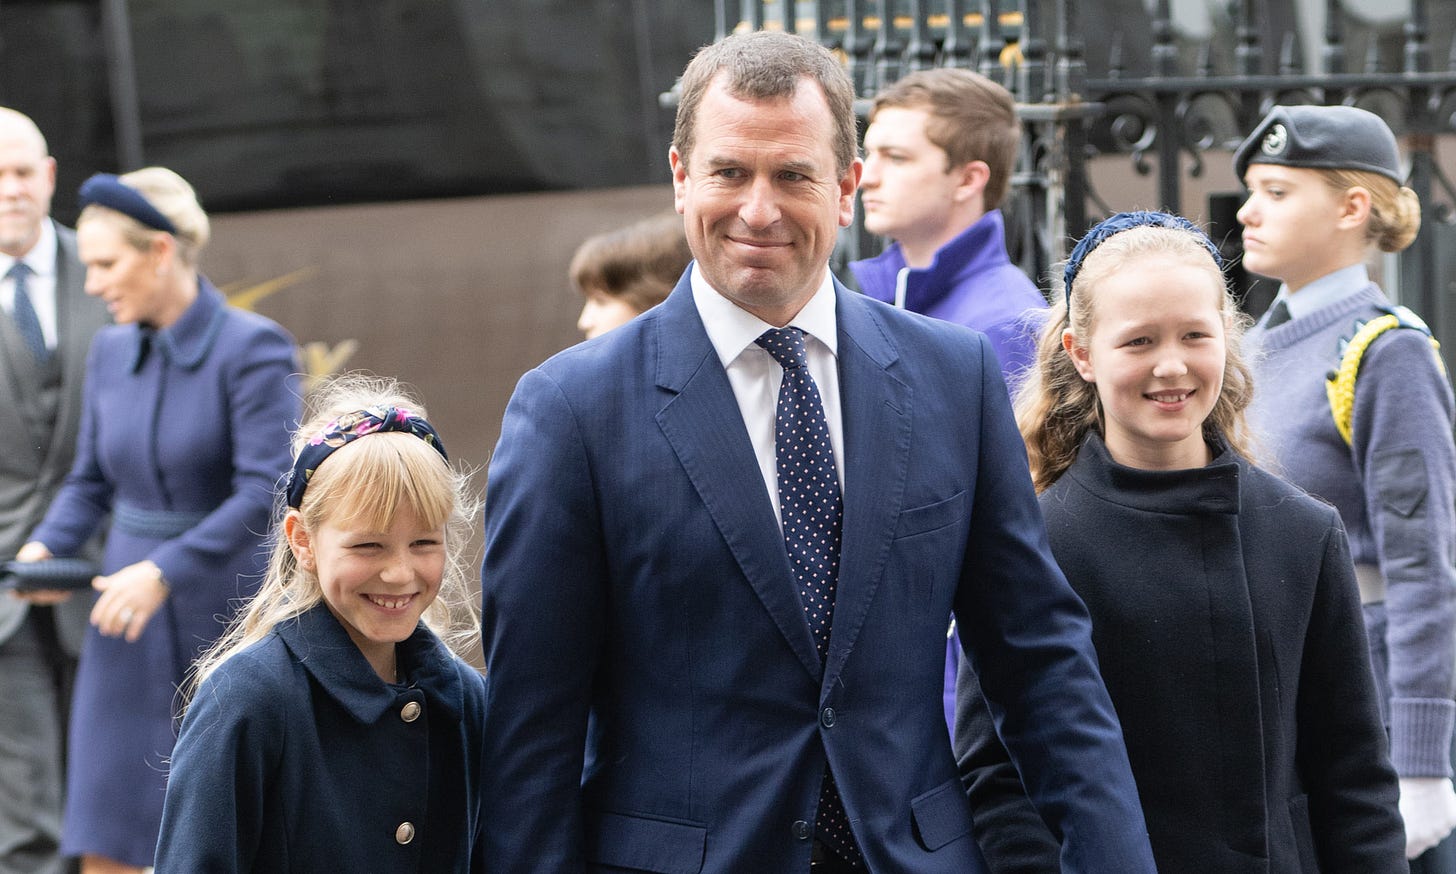 Peter Phillips holding hands with daughters Savannah and Isla